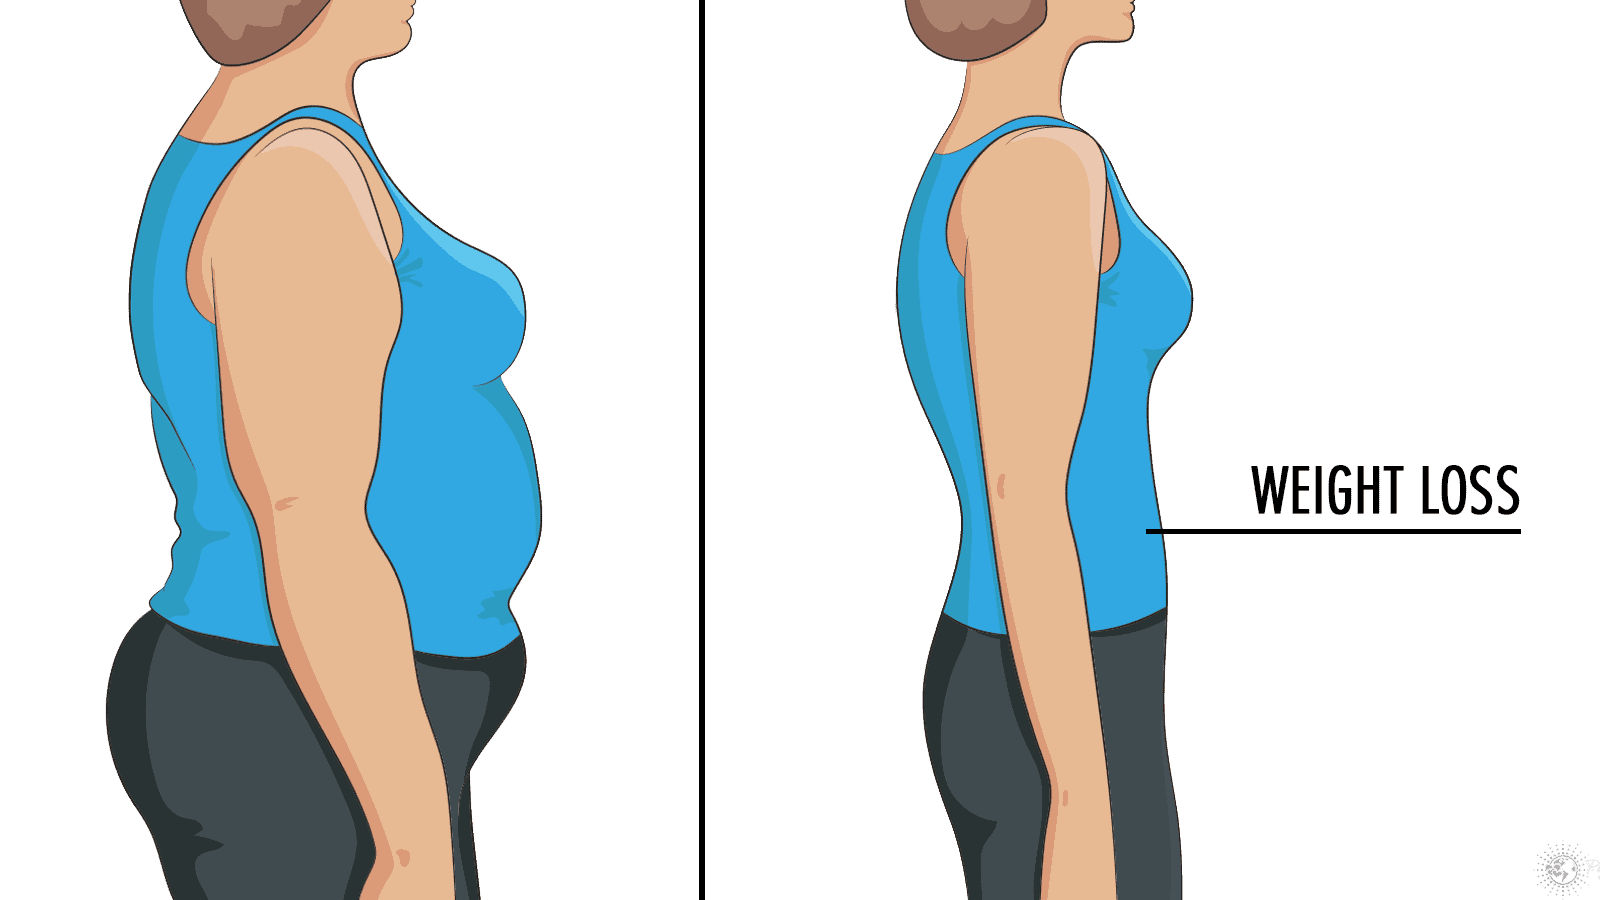 Health Expert Explains 6 Ways To Lose Weight If You Have PCOS